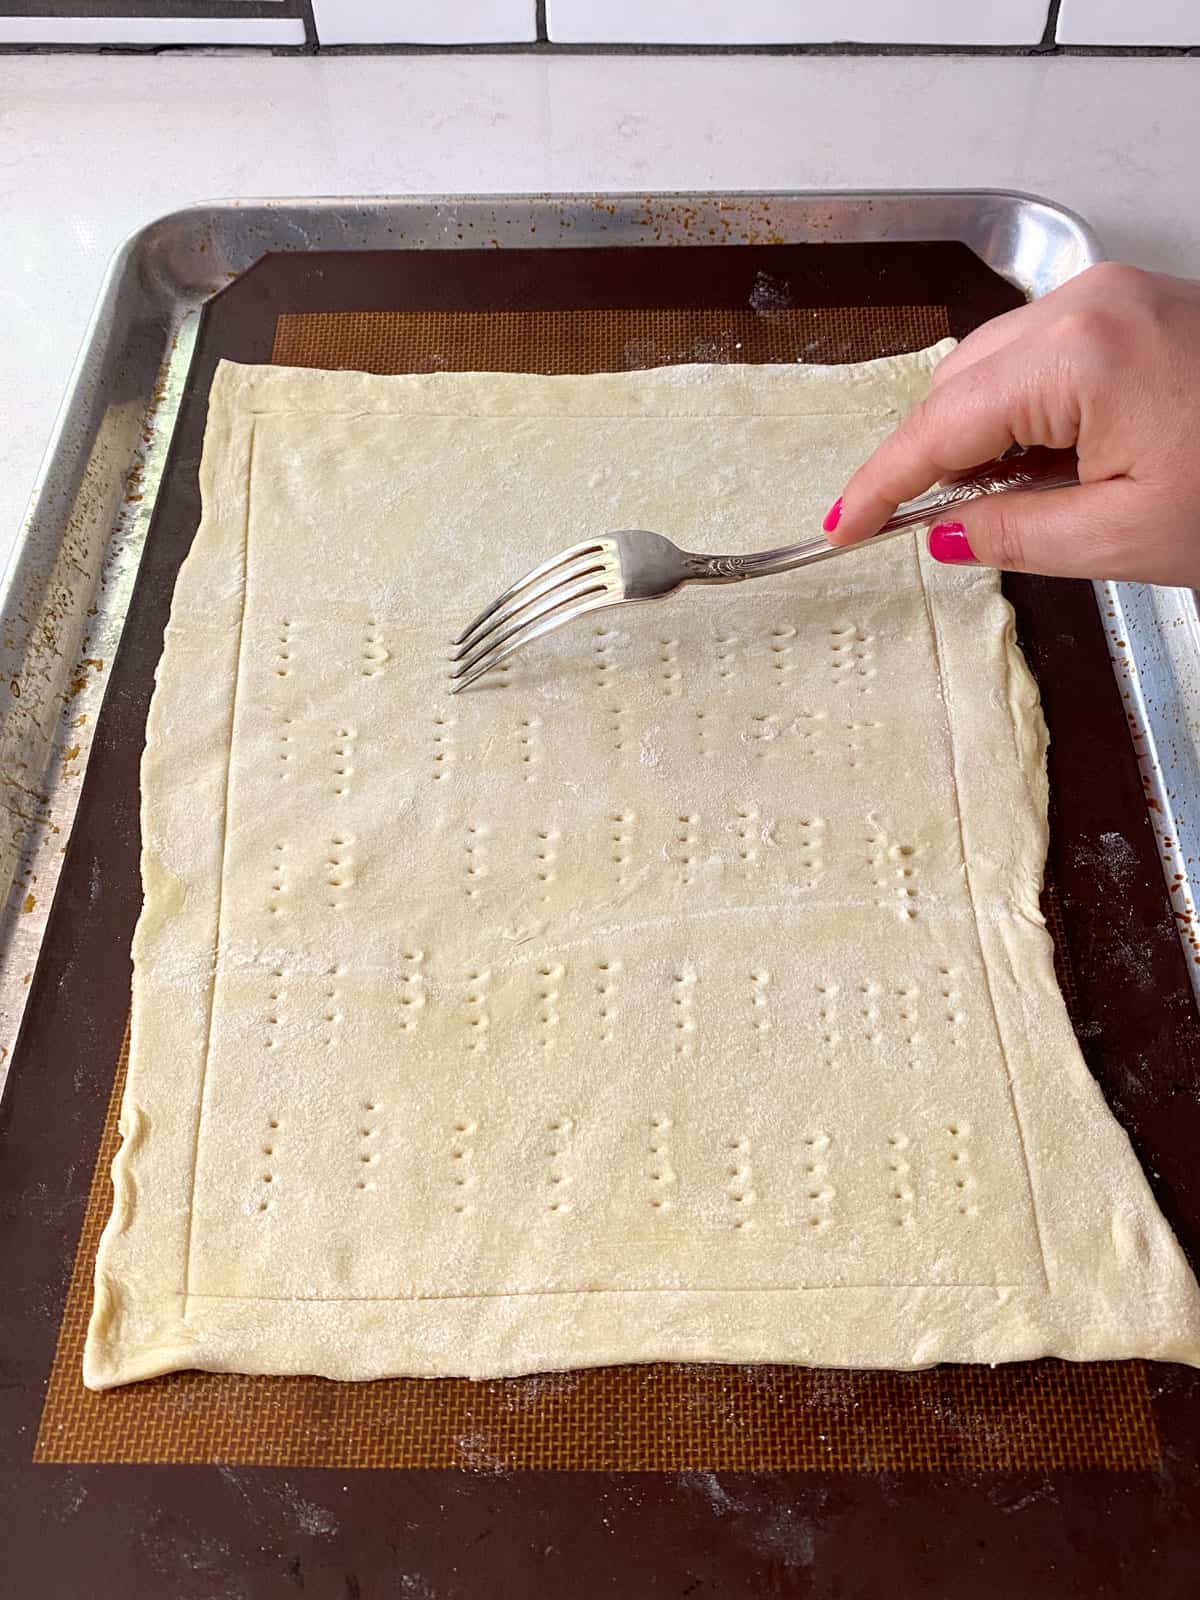 Score a border around the puff pastry and use a fork to dot holes in the center of the pastry.